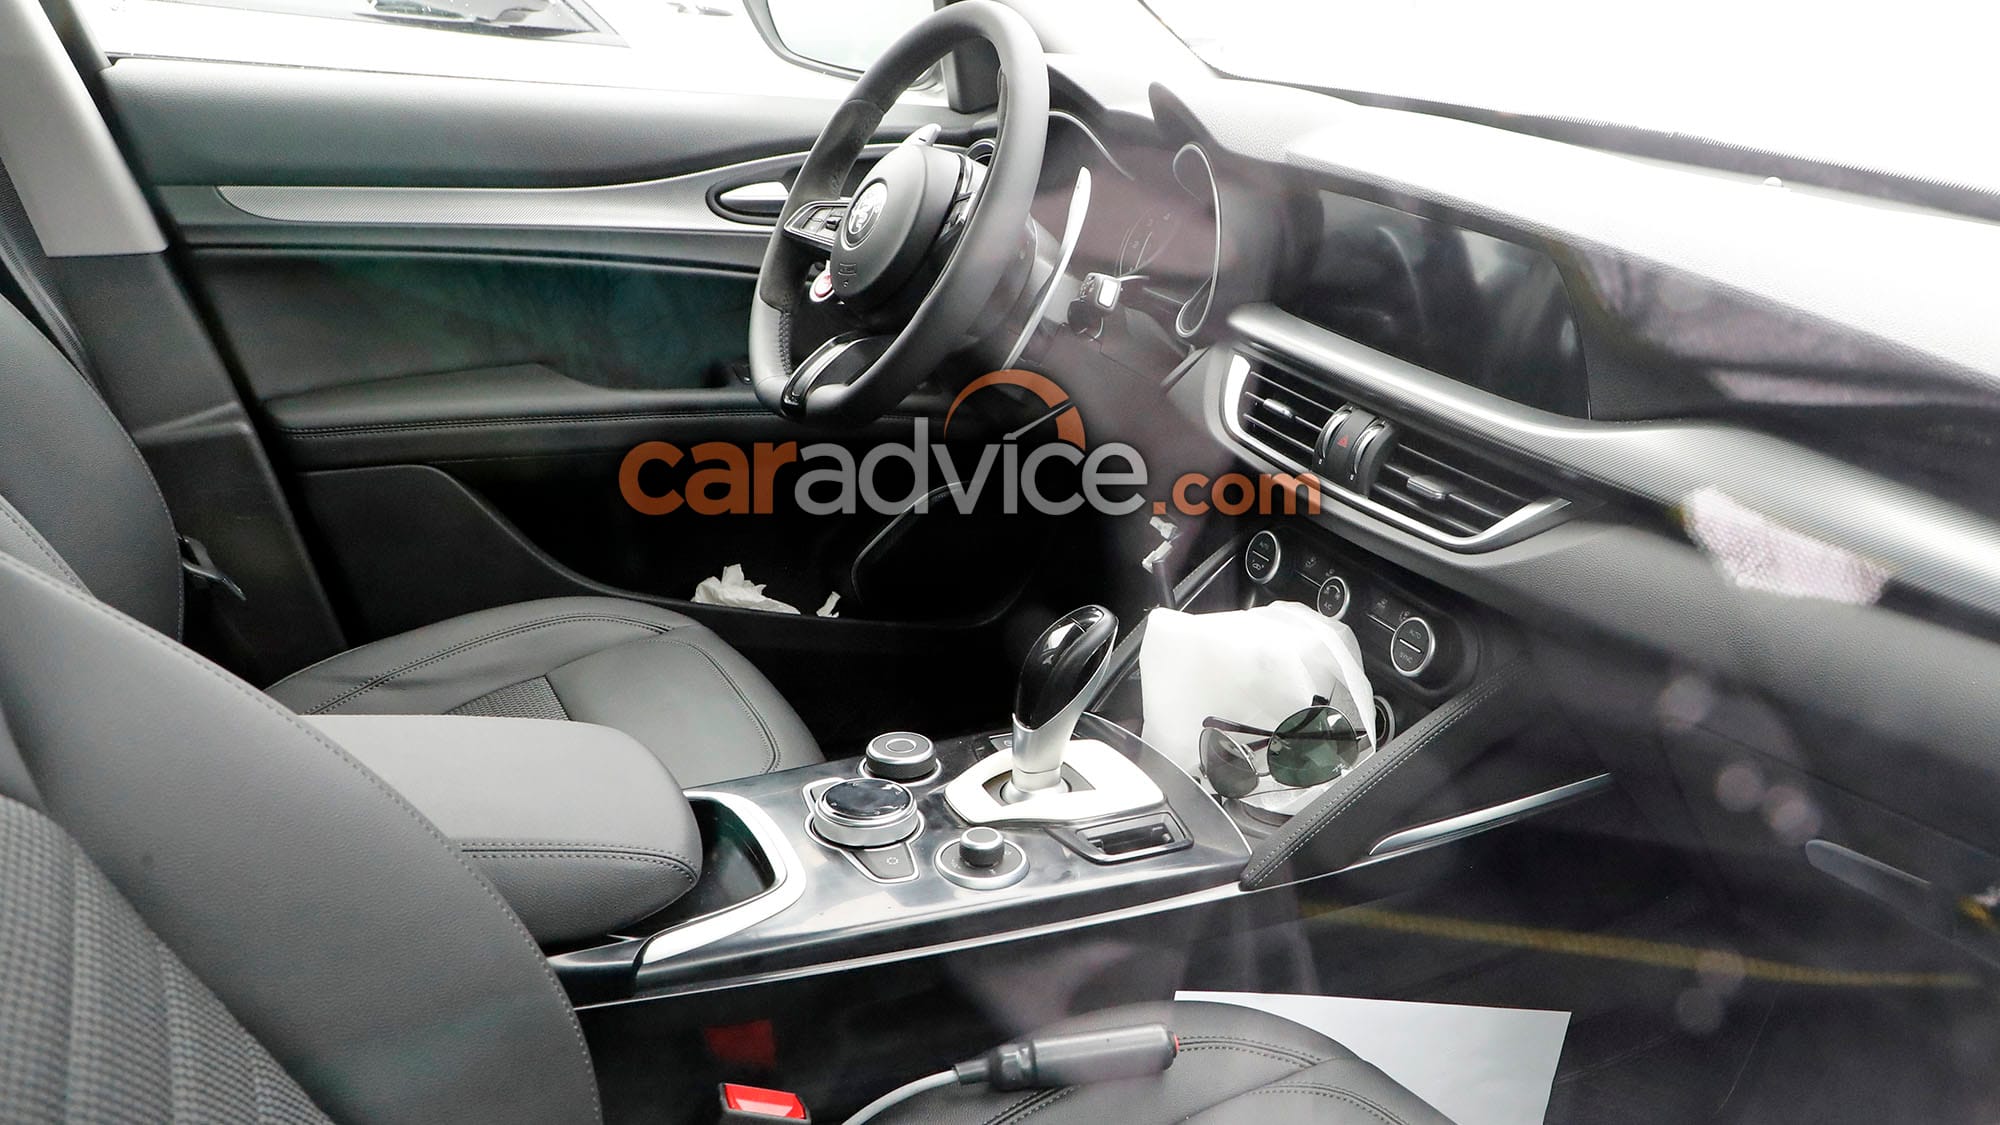 2020 Alfa Romeo Stelvio Facelift Spied Inside And Out